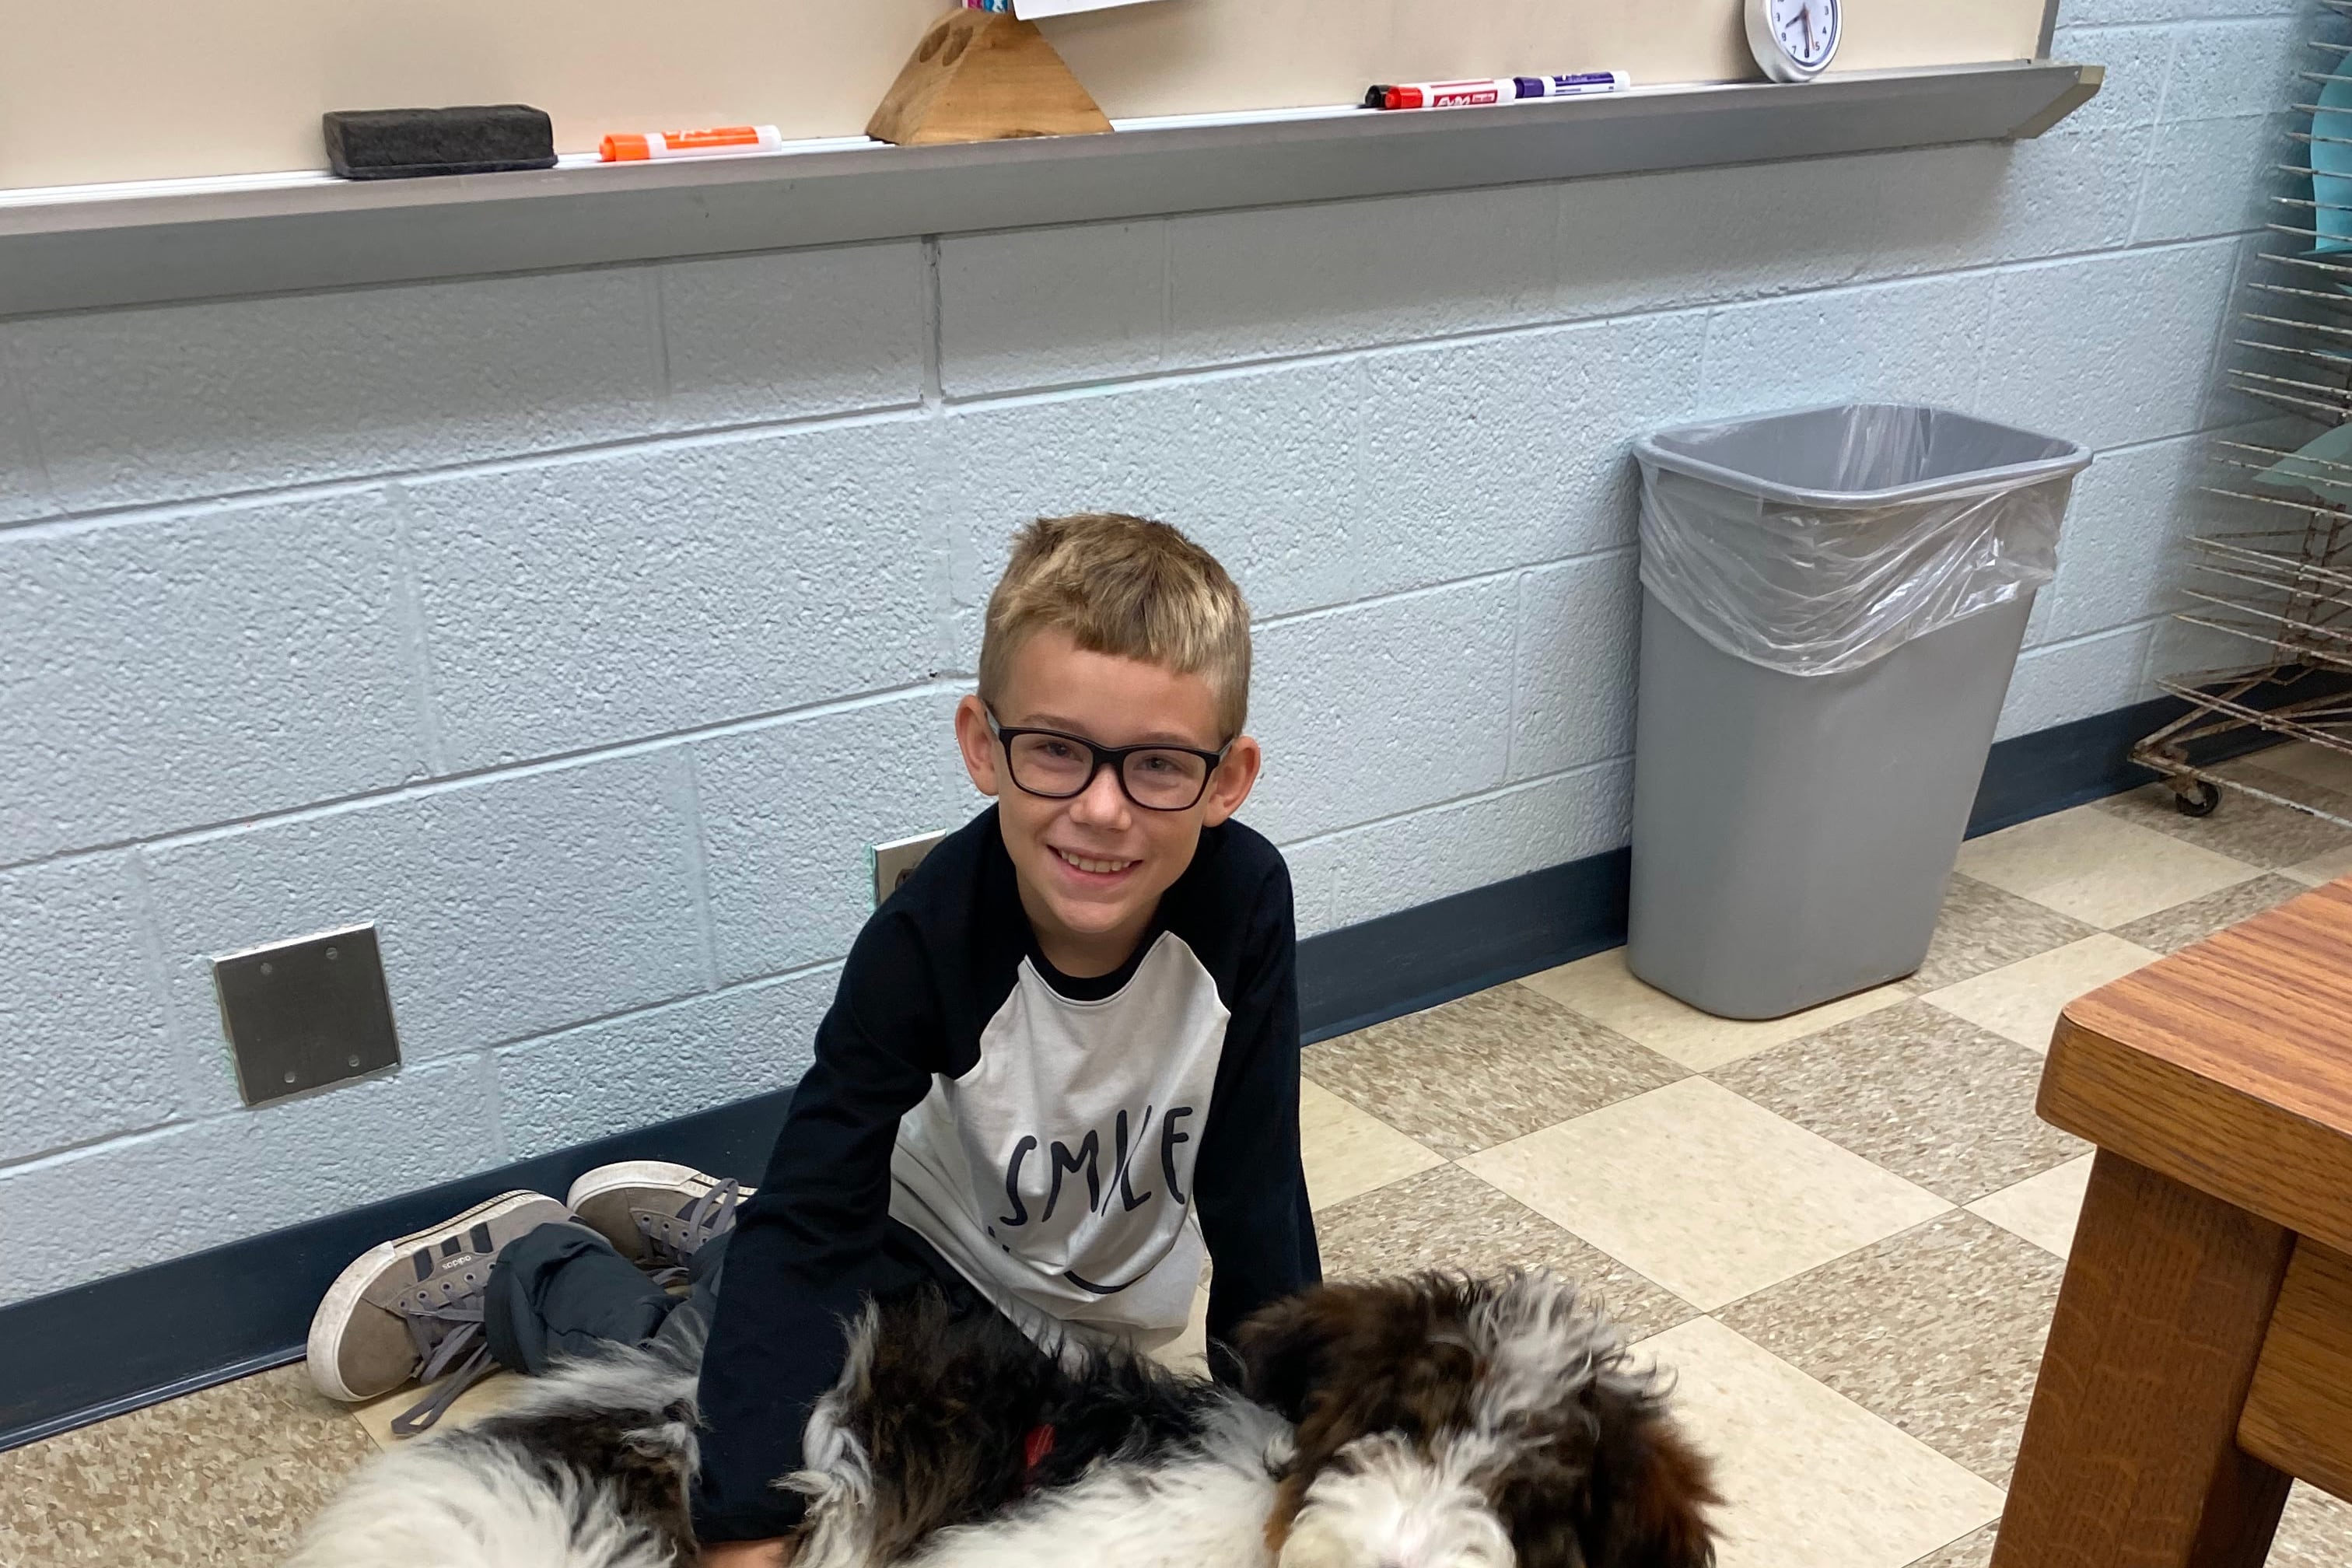 a student sits on the linoleum floor of a classroom with a hand on the dog sprawled in front of him